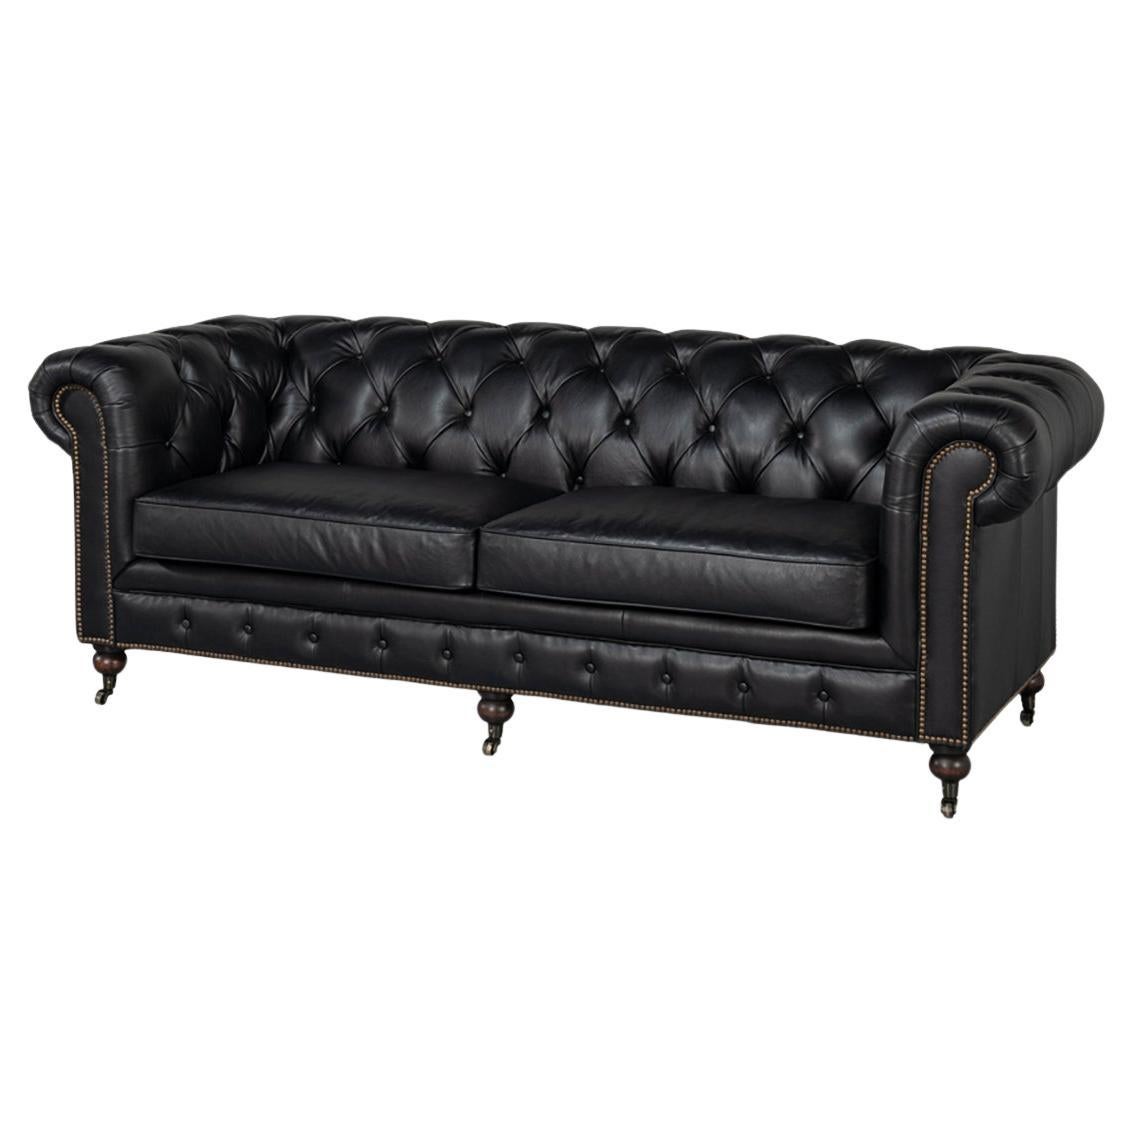 Black Chesterfield Sofa For Sale